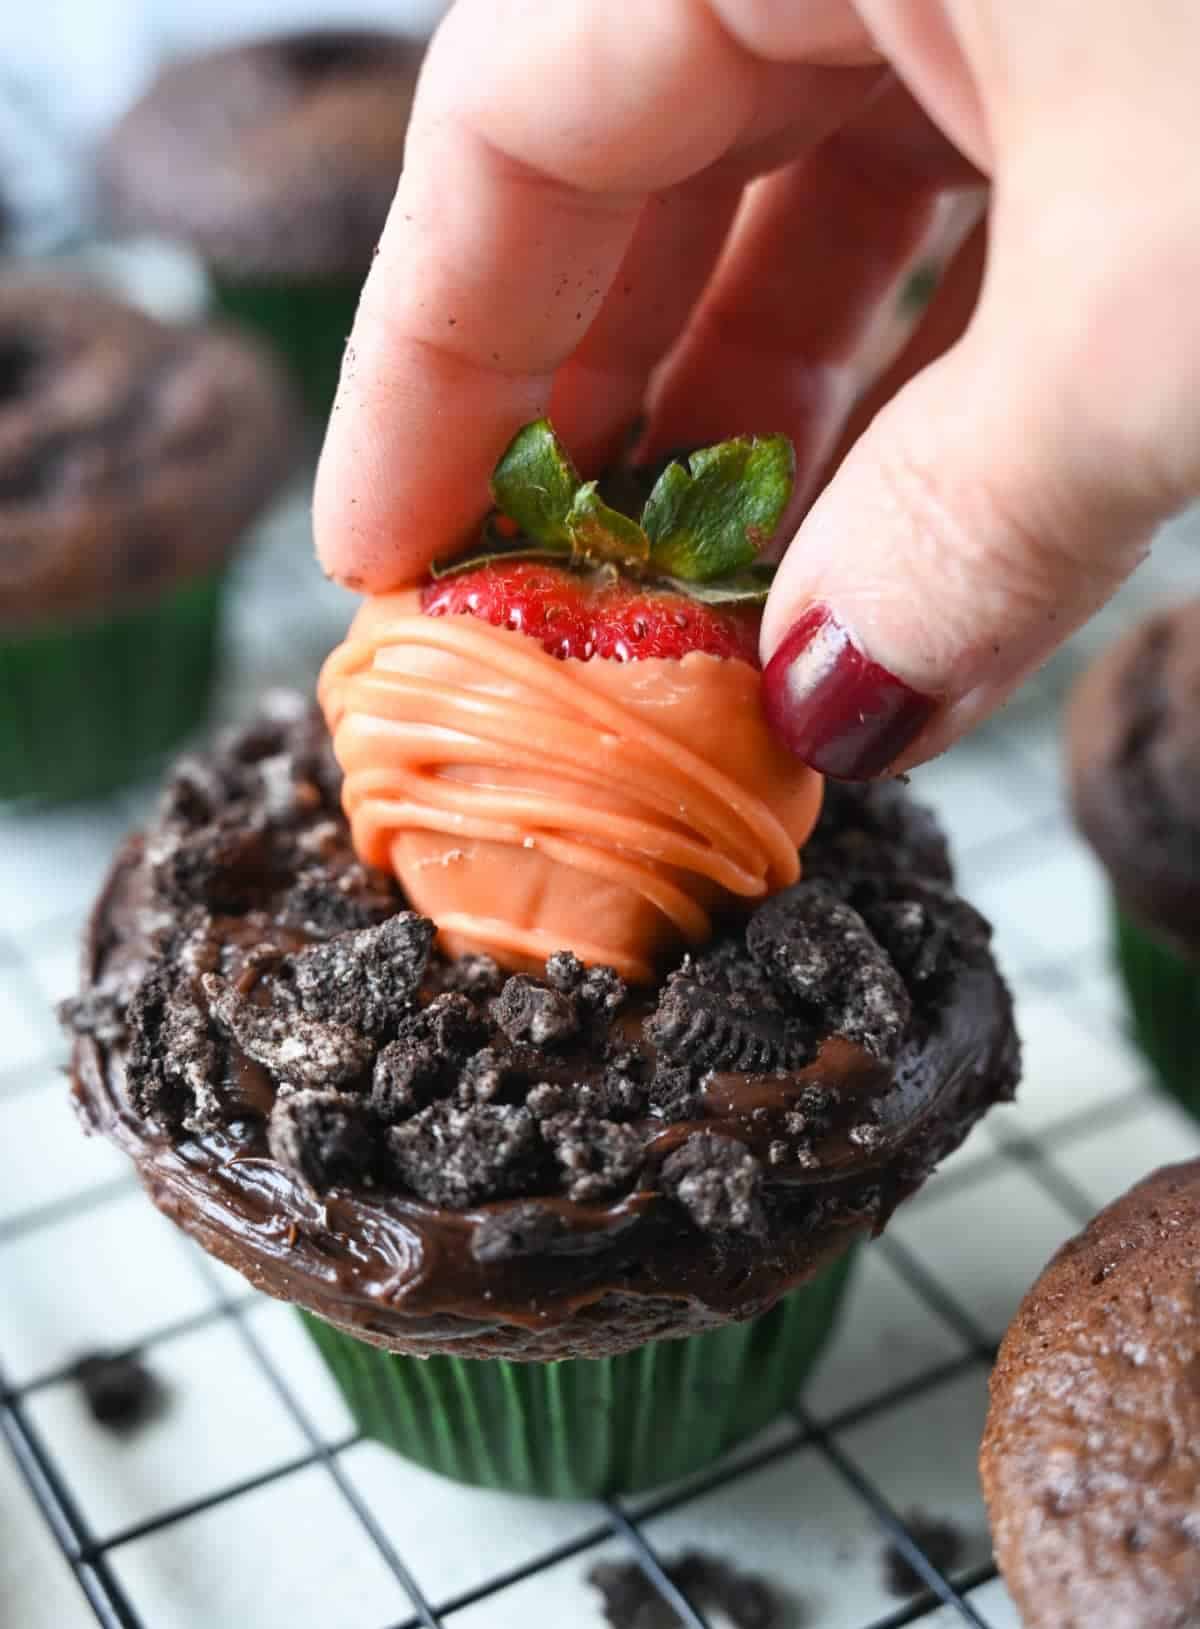 A orange chocolate dipped strawberry being placed right on top of the chocolate cupcake.